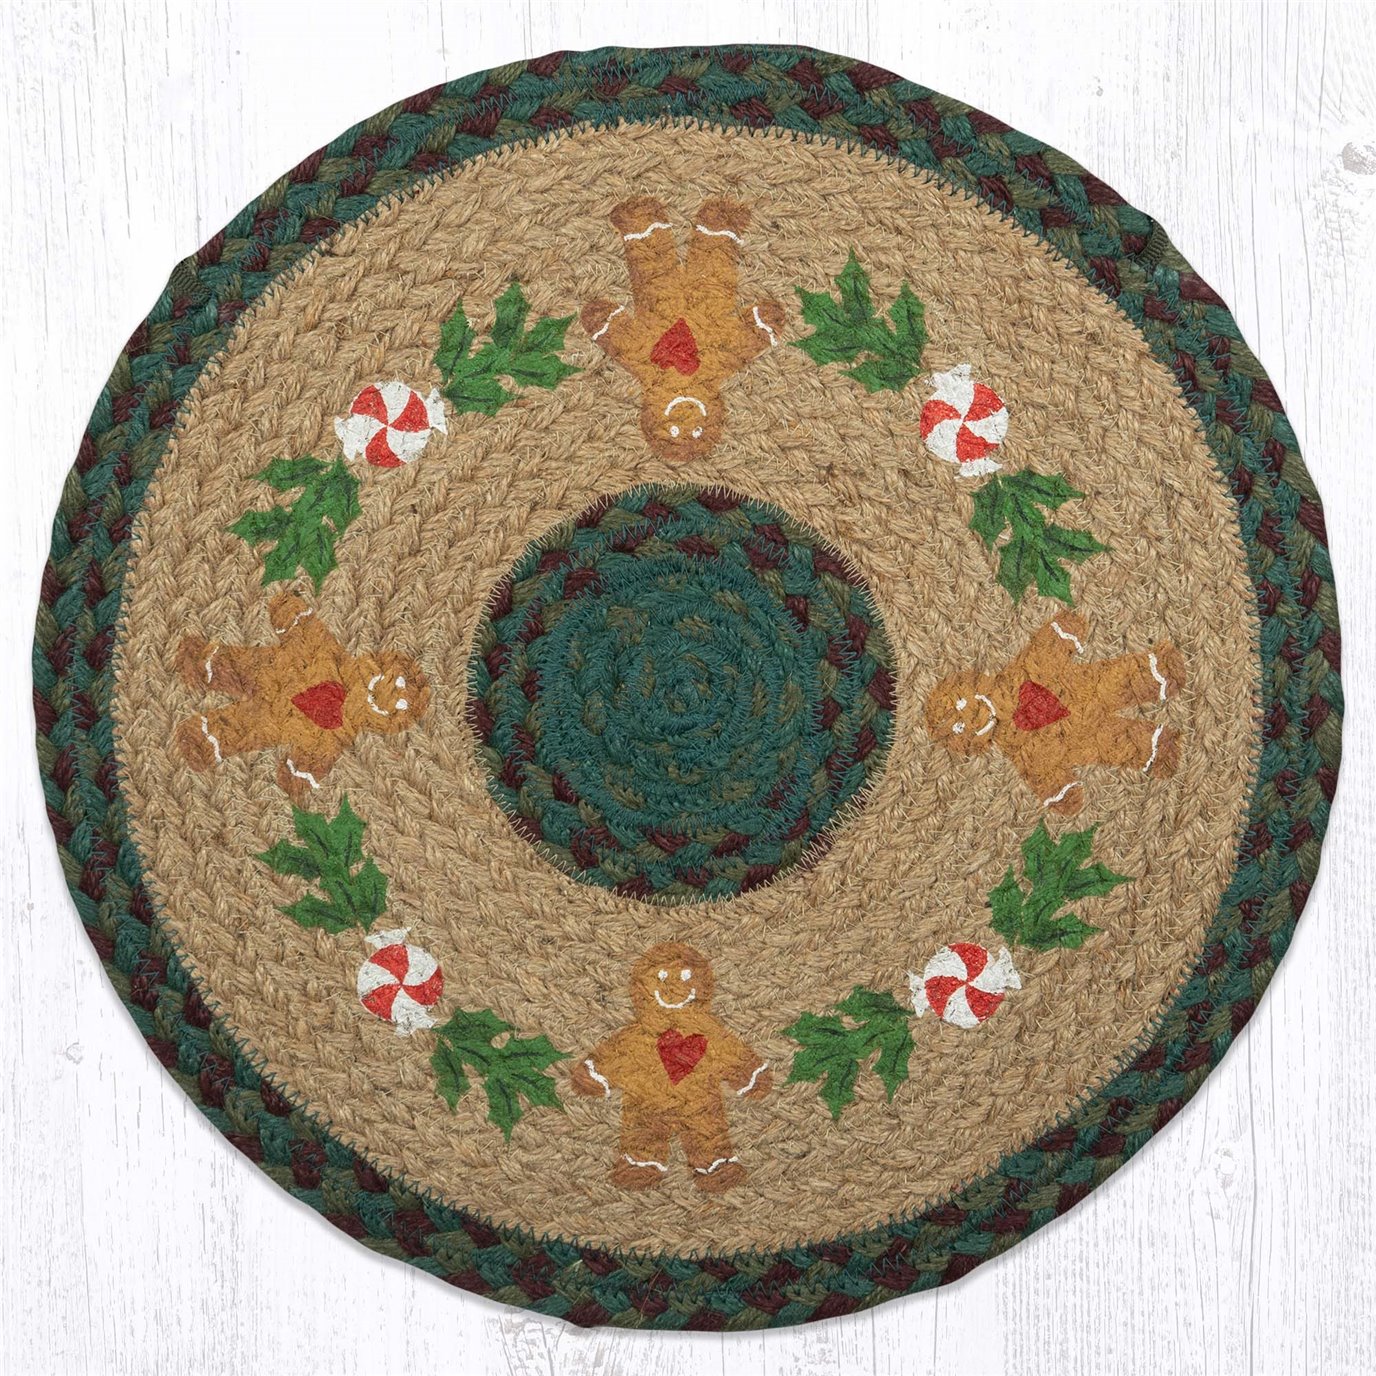 Gingerbread Man Printed Round Placemat 15"x15"